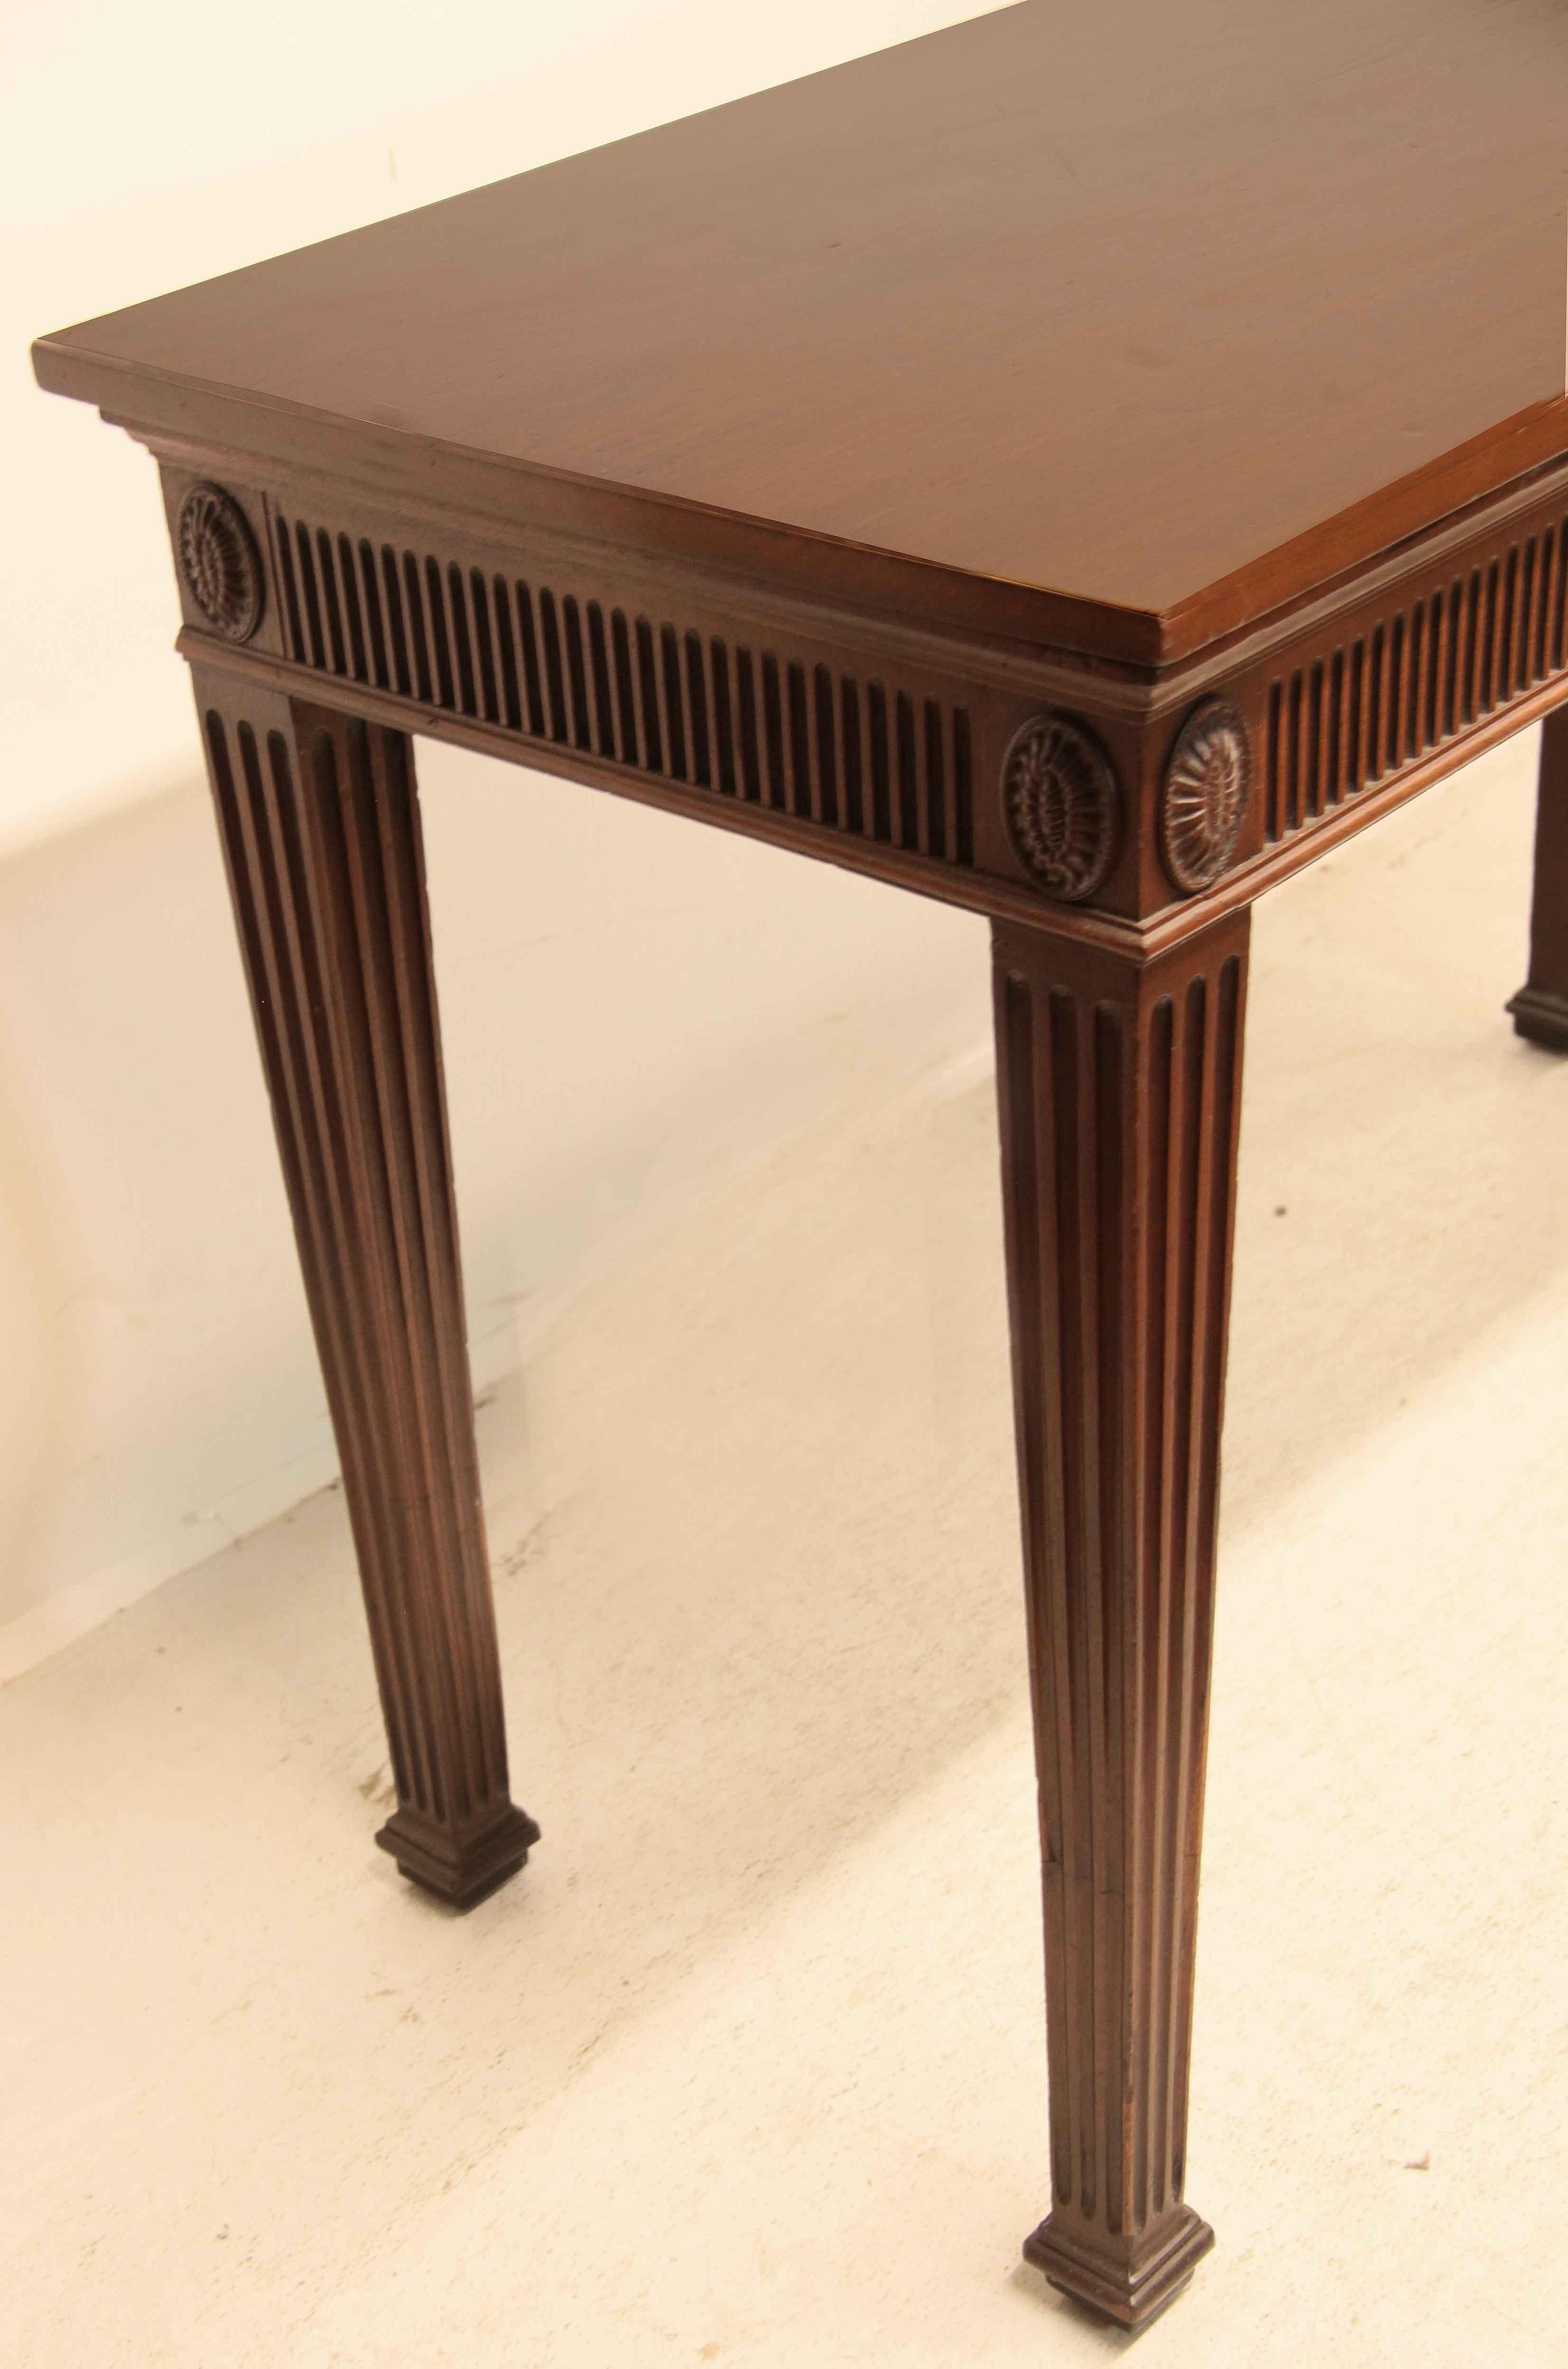 George III mahogany console table with understated elegance,  the top has nice figuring and color,  the frieze is reeded around the front and sides with vertical oval medallions at the corners;  reeded and tapered legs terminate with cove molded